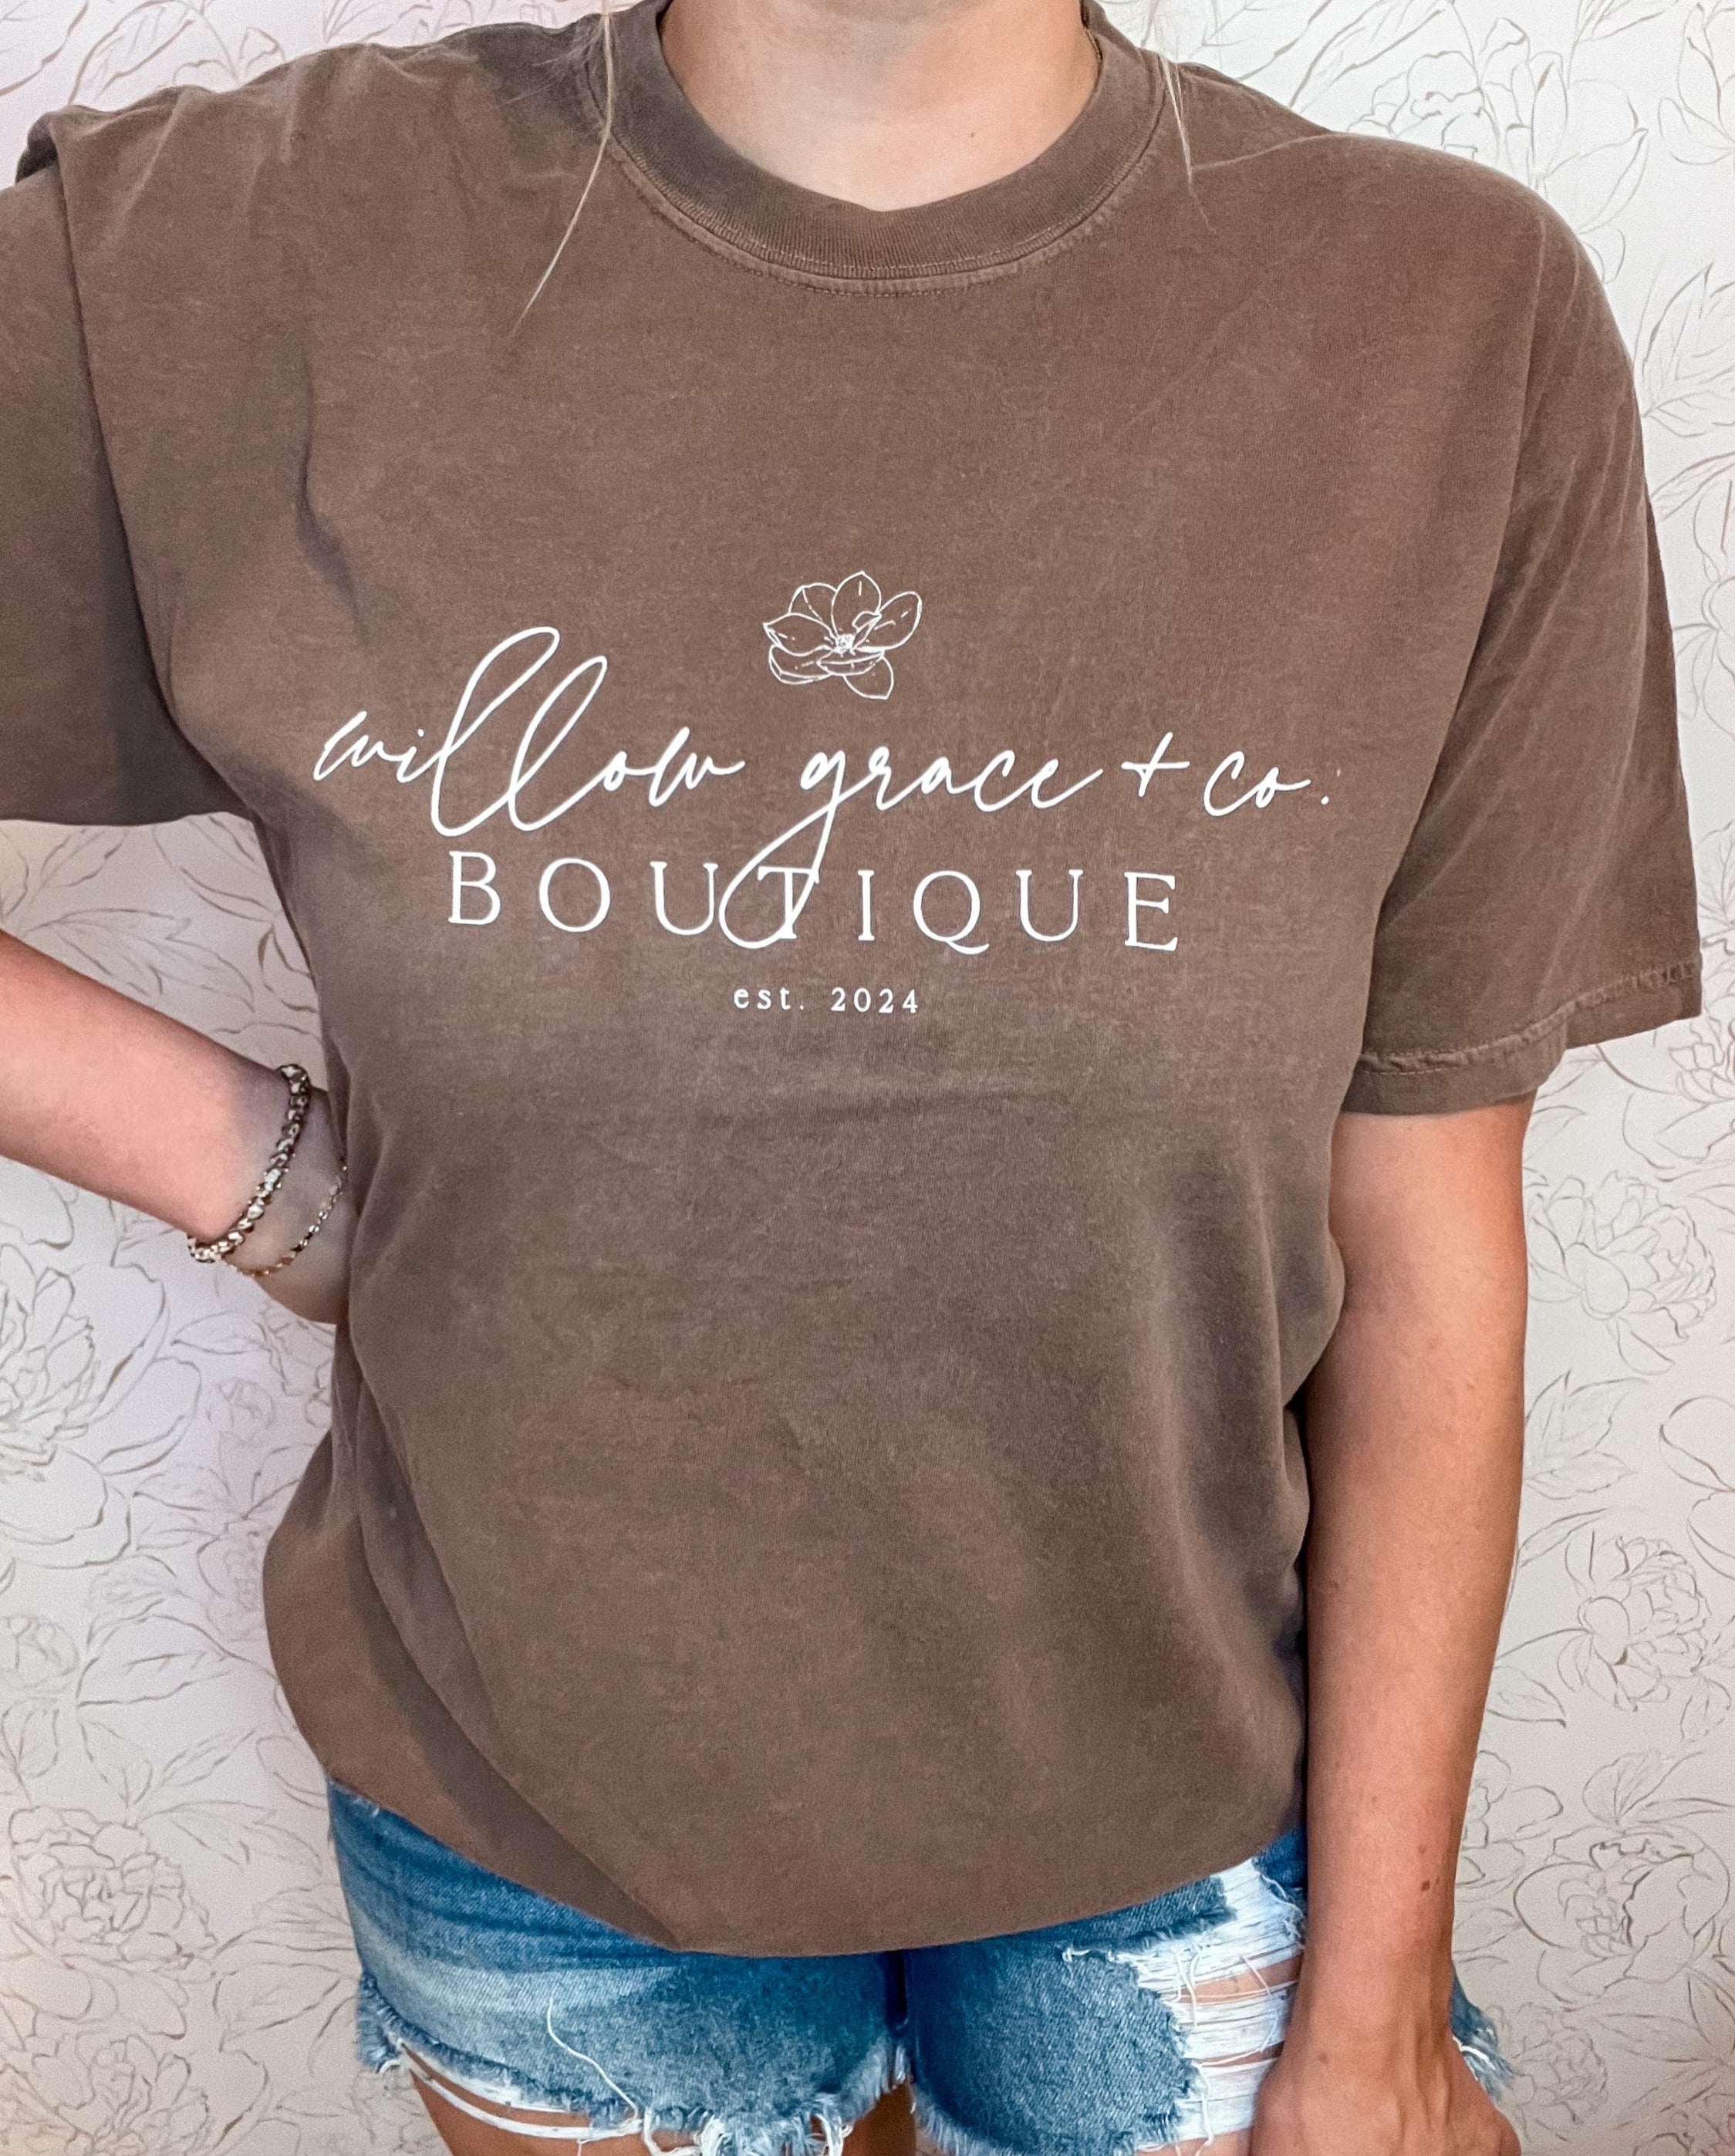 A Comfort Colors tee in Espresso color featuring the Willow Grace and Co main logo across the front in white.